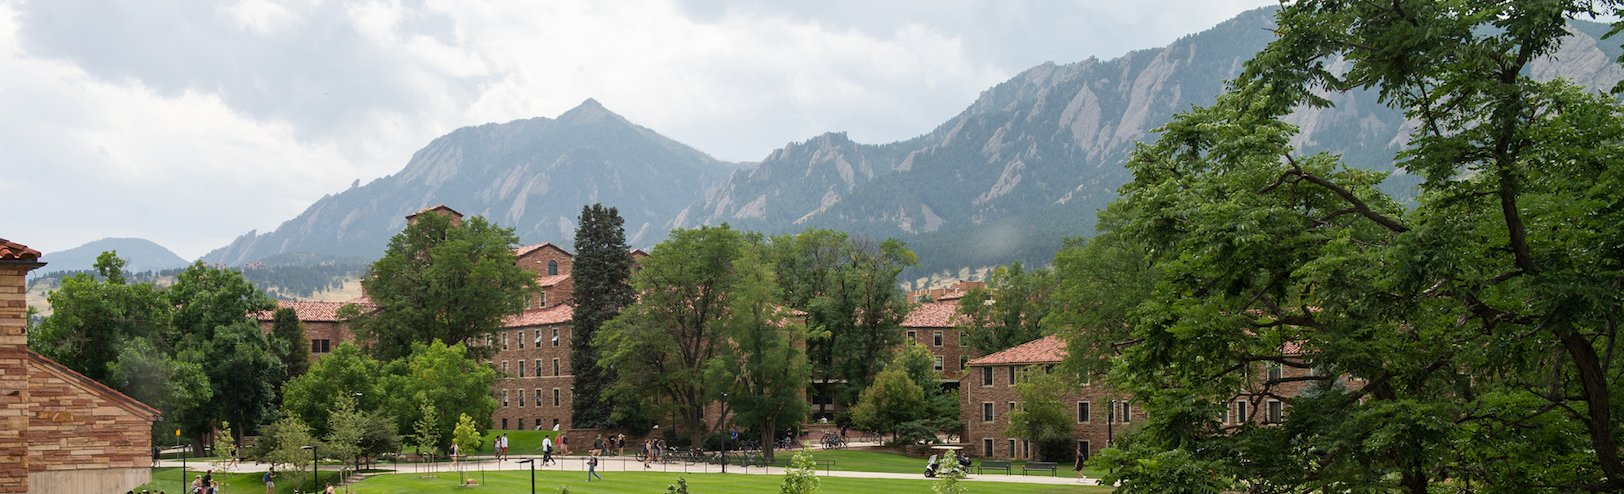 View of the Flatirons and campus